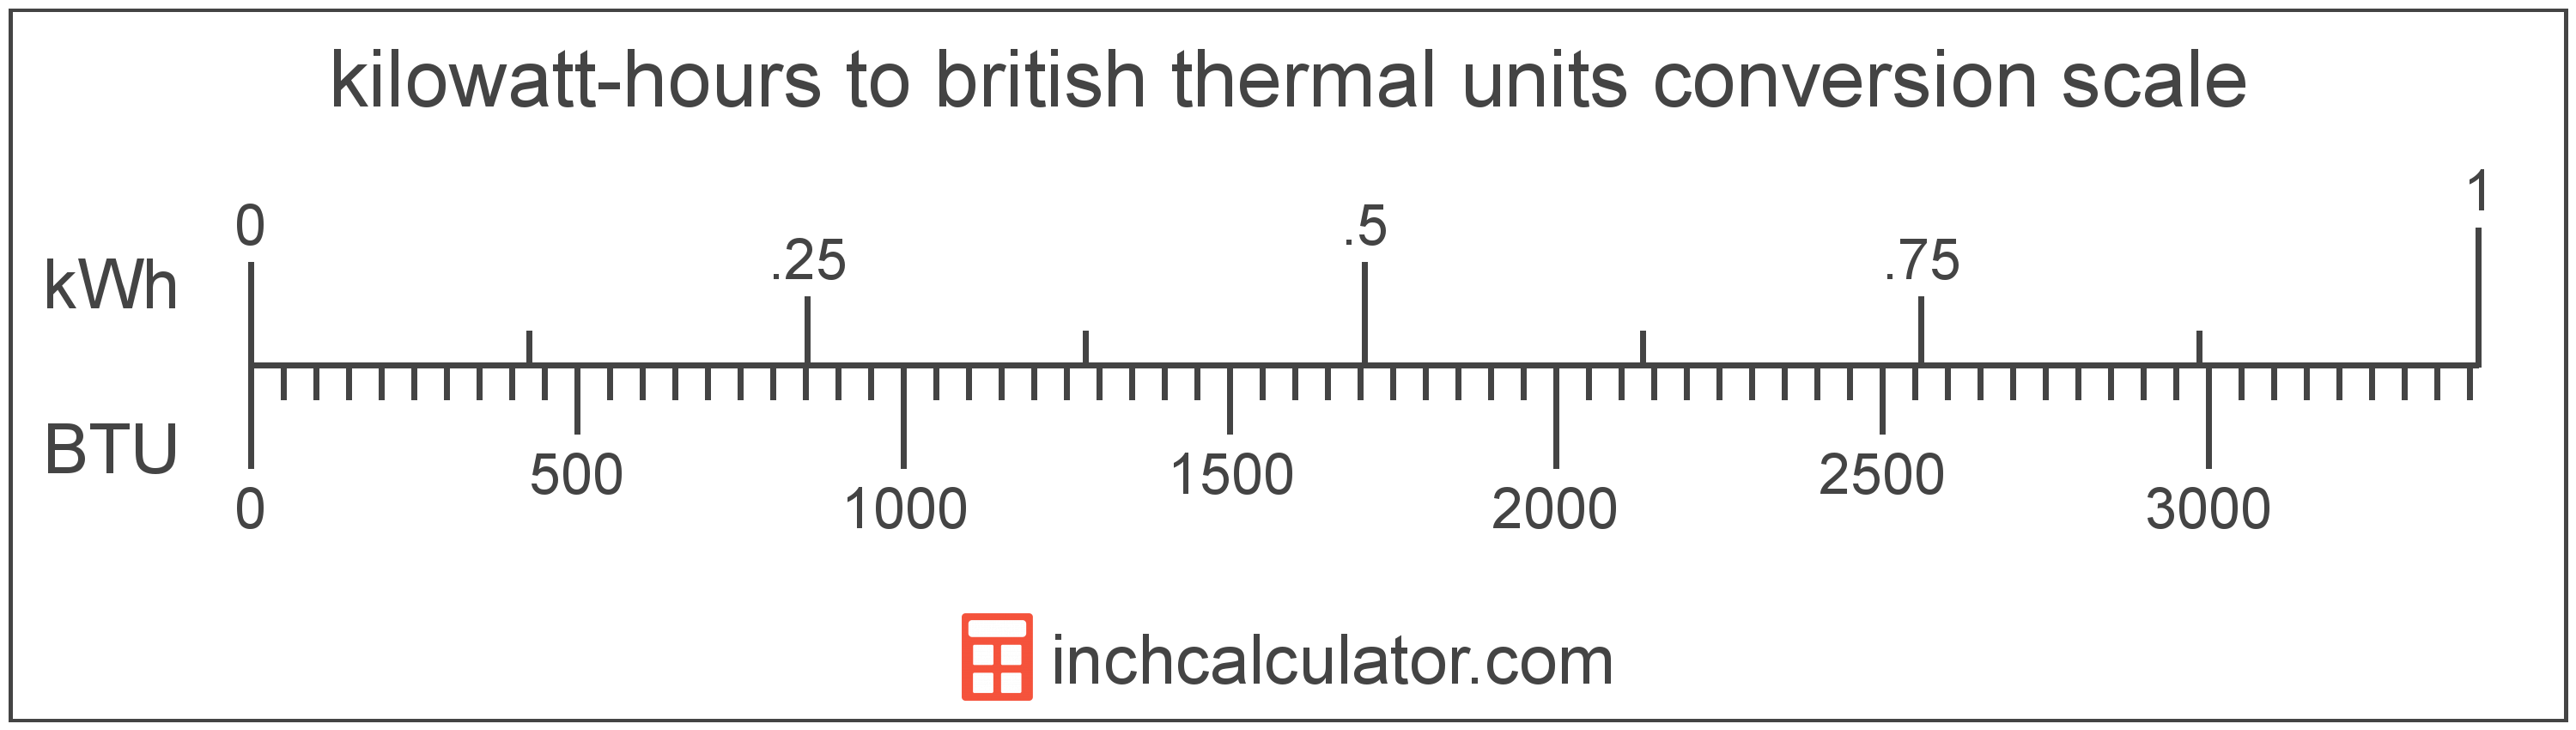 conversion scale showing british thermal units and equivalent kilowatt-hours energy values